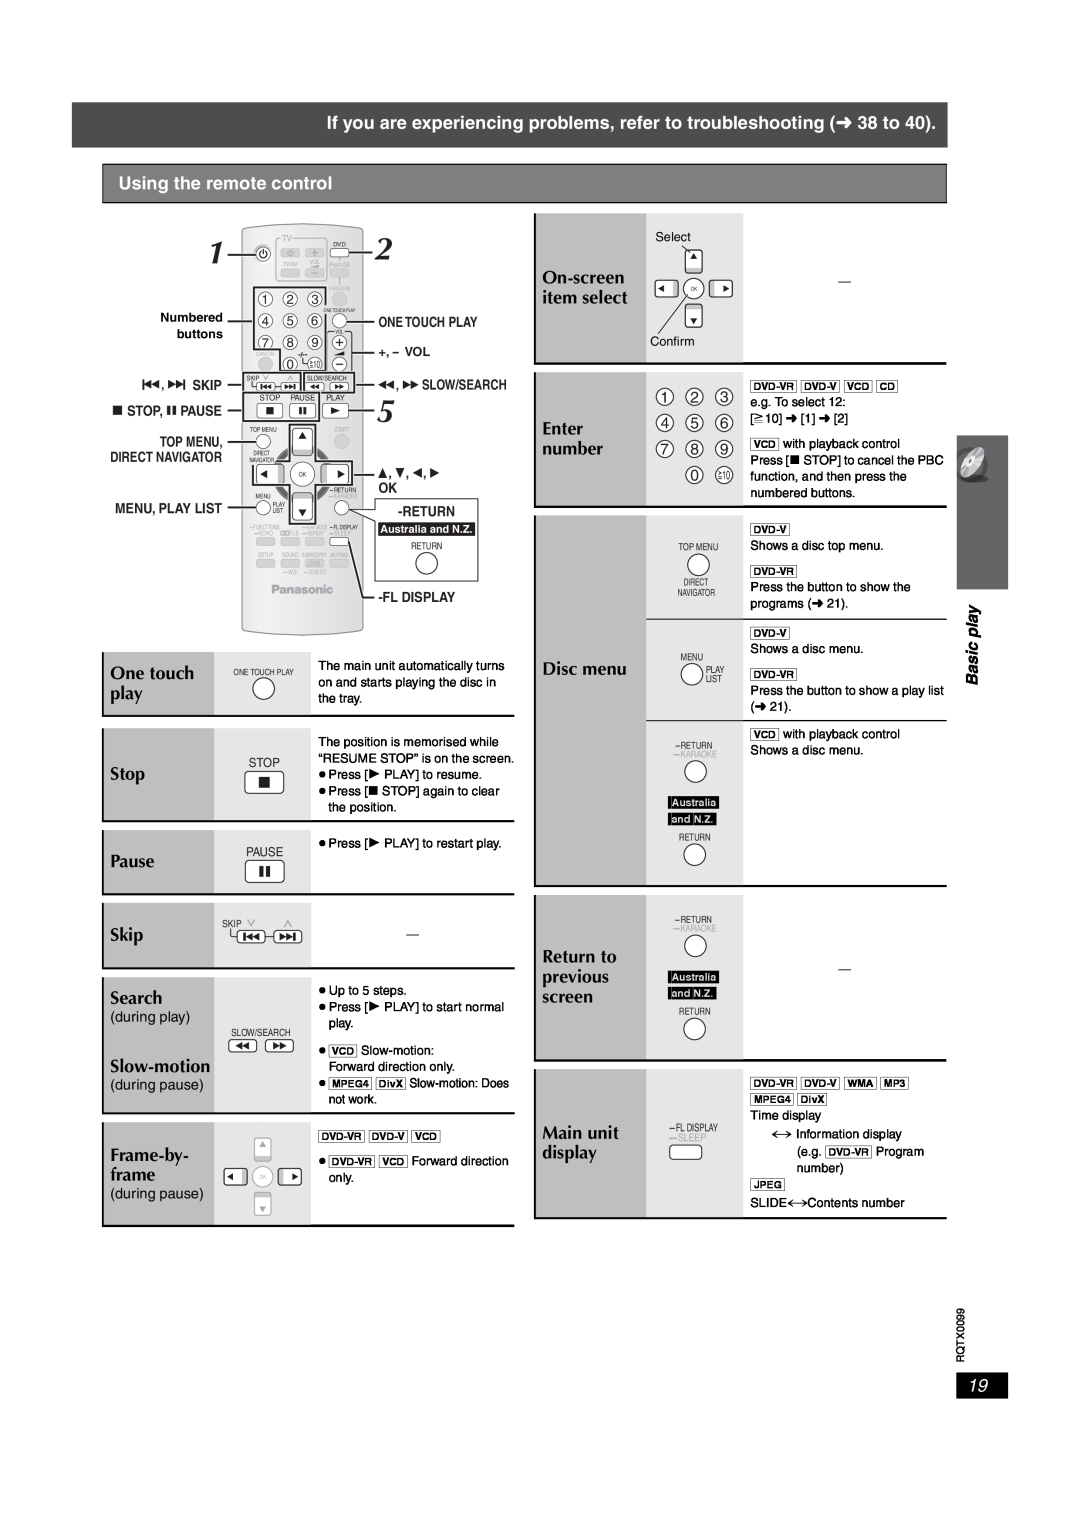 Panasonic SC-PT560, SC-PT565, SC-PT865 operating instructions Using the remote control, One touch, play, Stop 